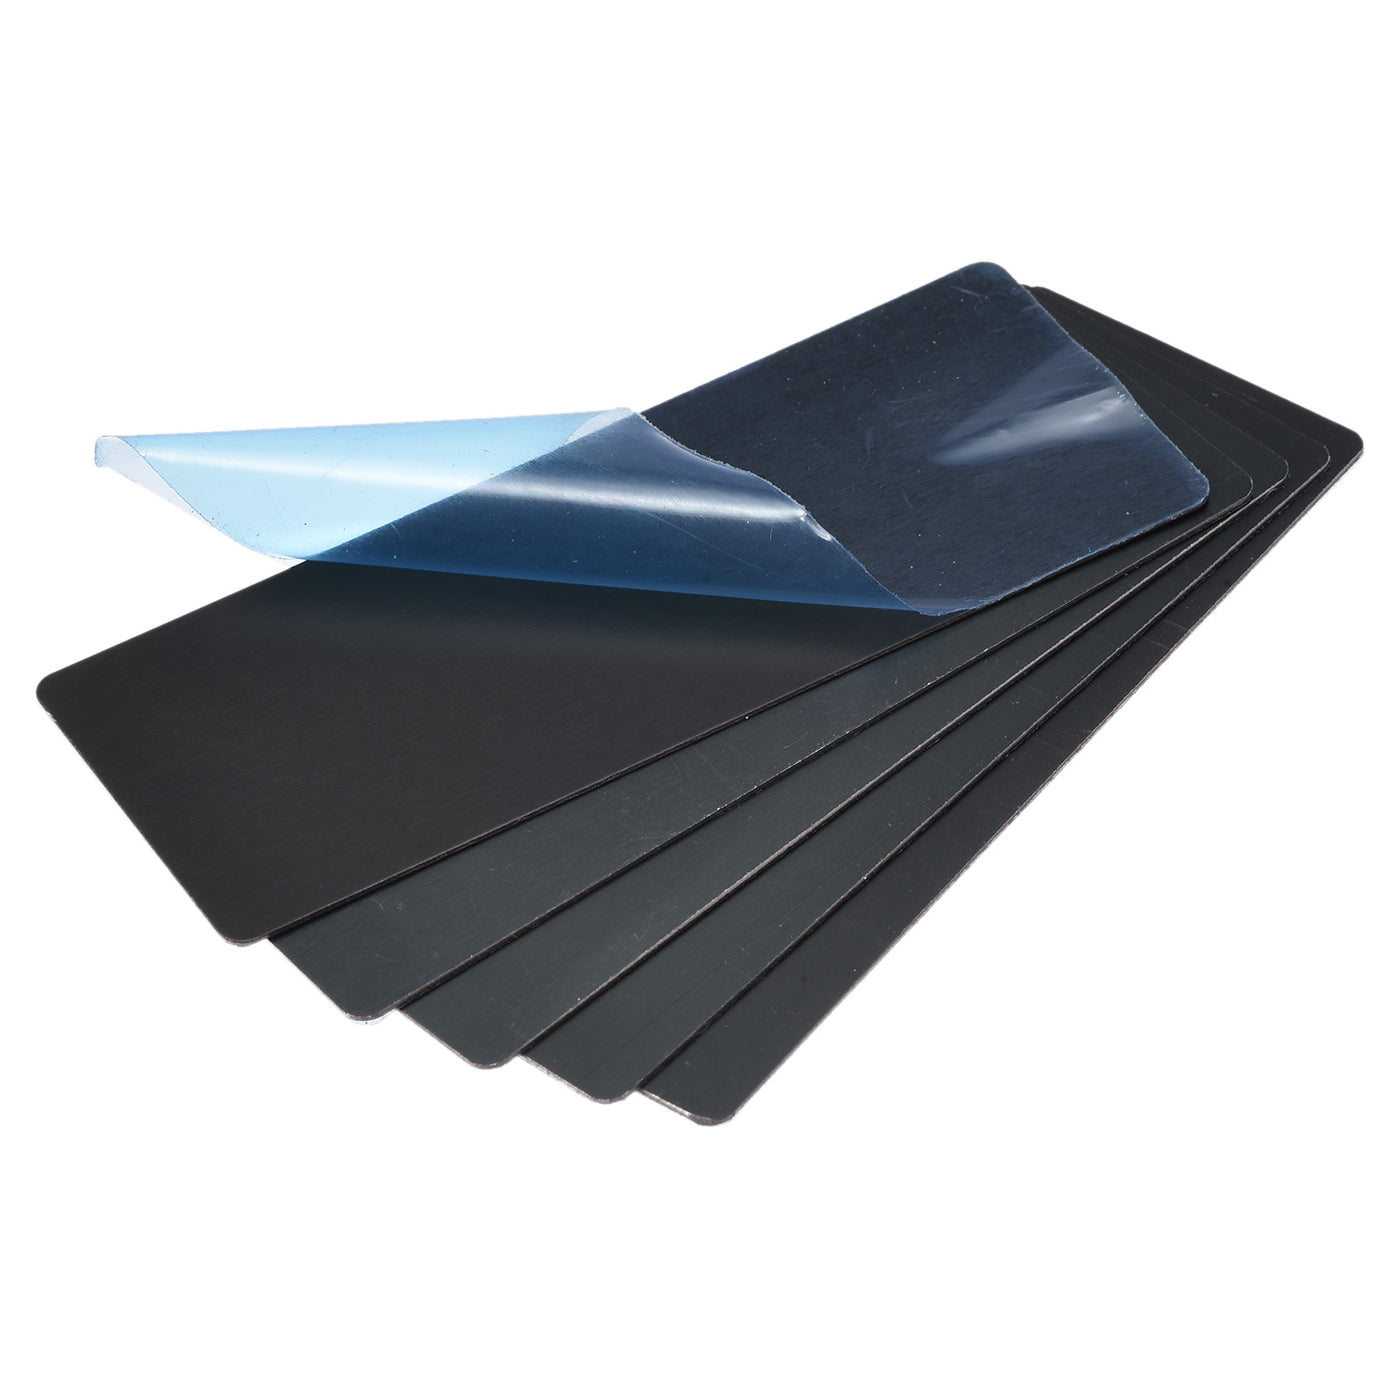 Uxcell Uxcell Blank Metal Card 85mm x 50mm x 1mm Anodized Aluminum Plate Black 5 Pcs